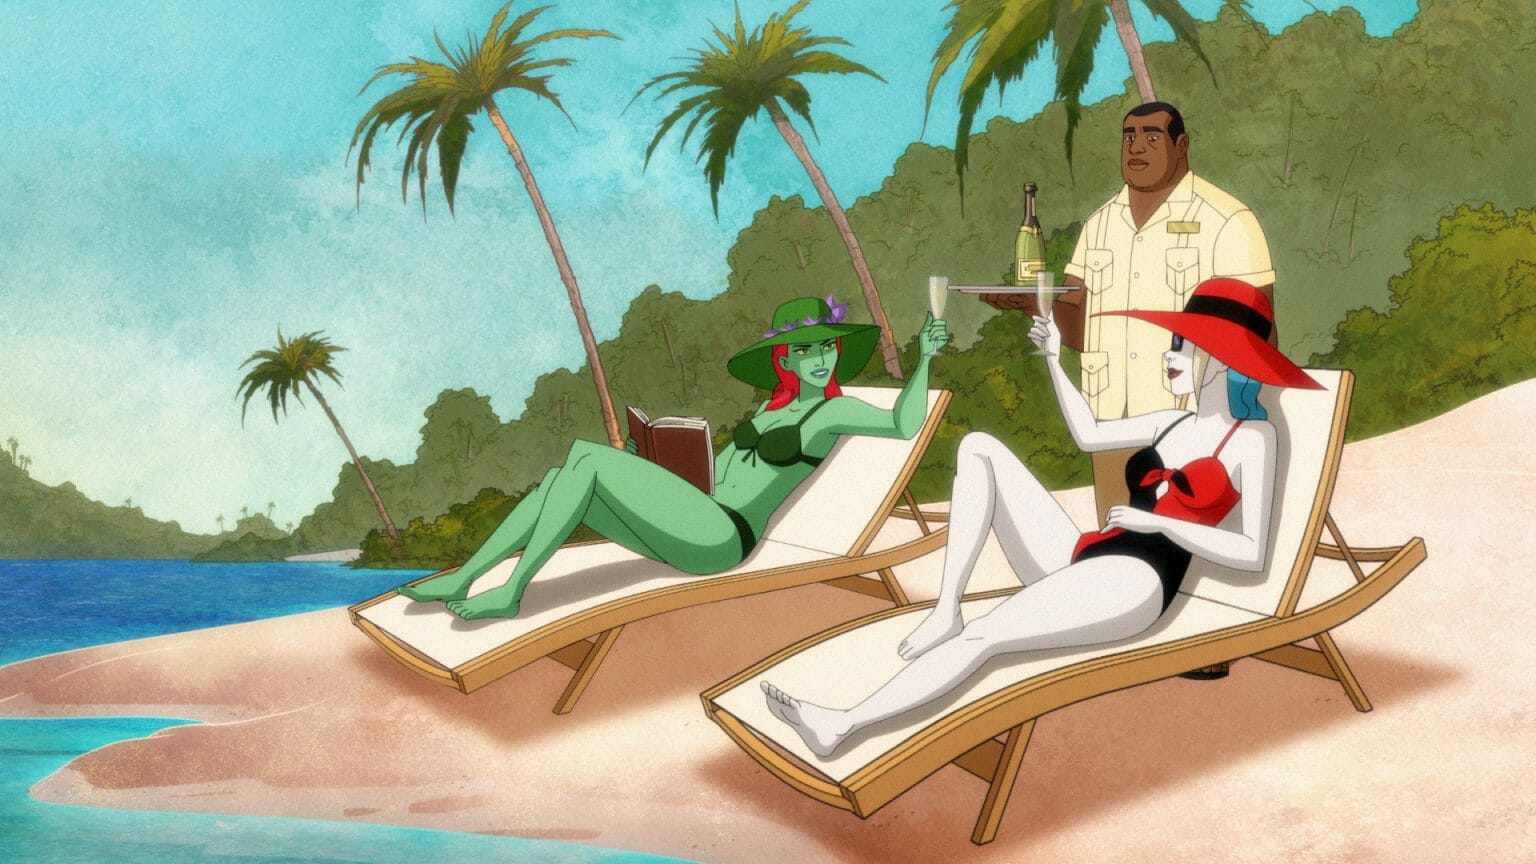 Poison Ivy and Harley Quinn share a toast as they are served champagne on a relaxing beach as part of their Eat. Bang! Kill. tour in HARLEY QUINN Season 3.